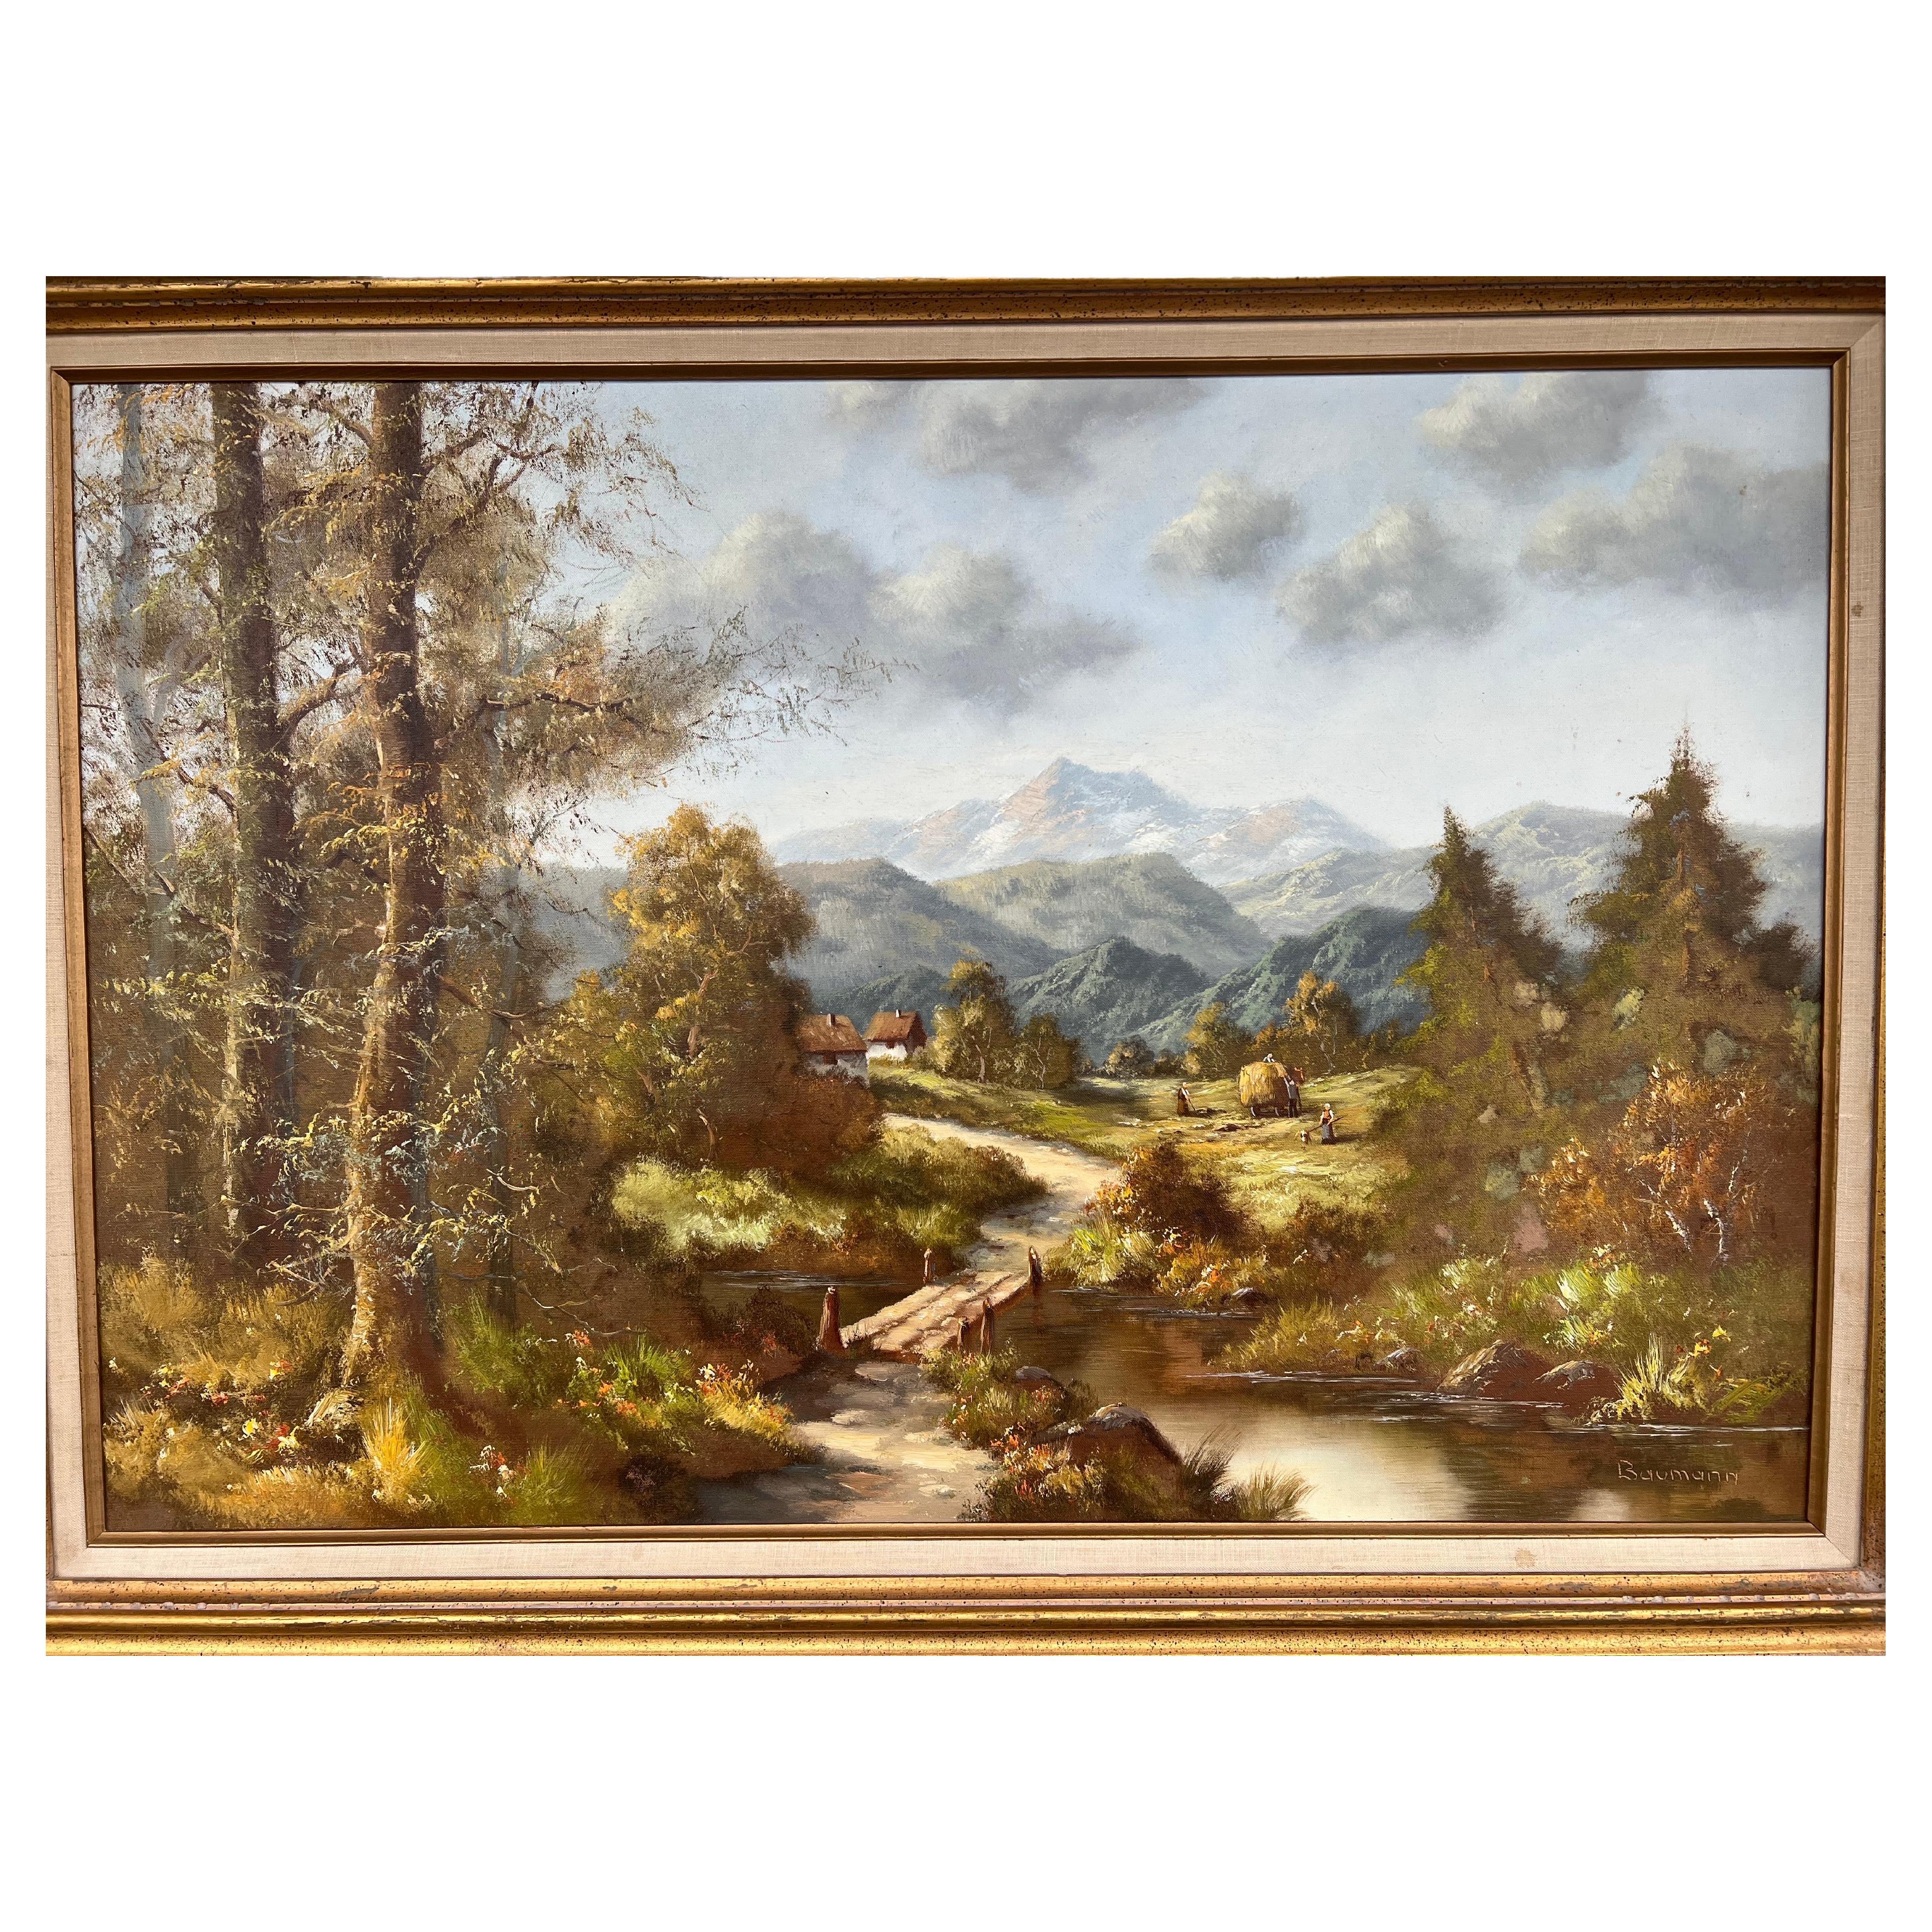 Framed original oil on canvas by listed artist Lothar Baumann, European landscape, Lothar Baumann was born in Bavaria and studied the arts in Munich, Germany. His later works expressed his love for the Bavarian landscapes of his youth. the painting